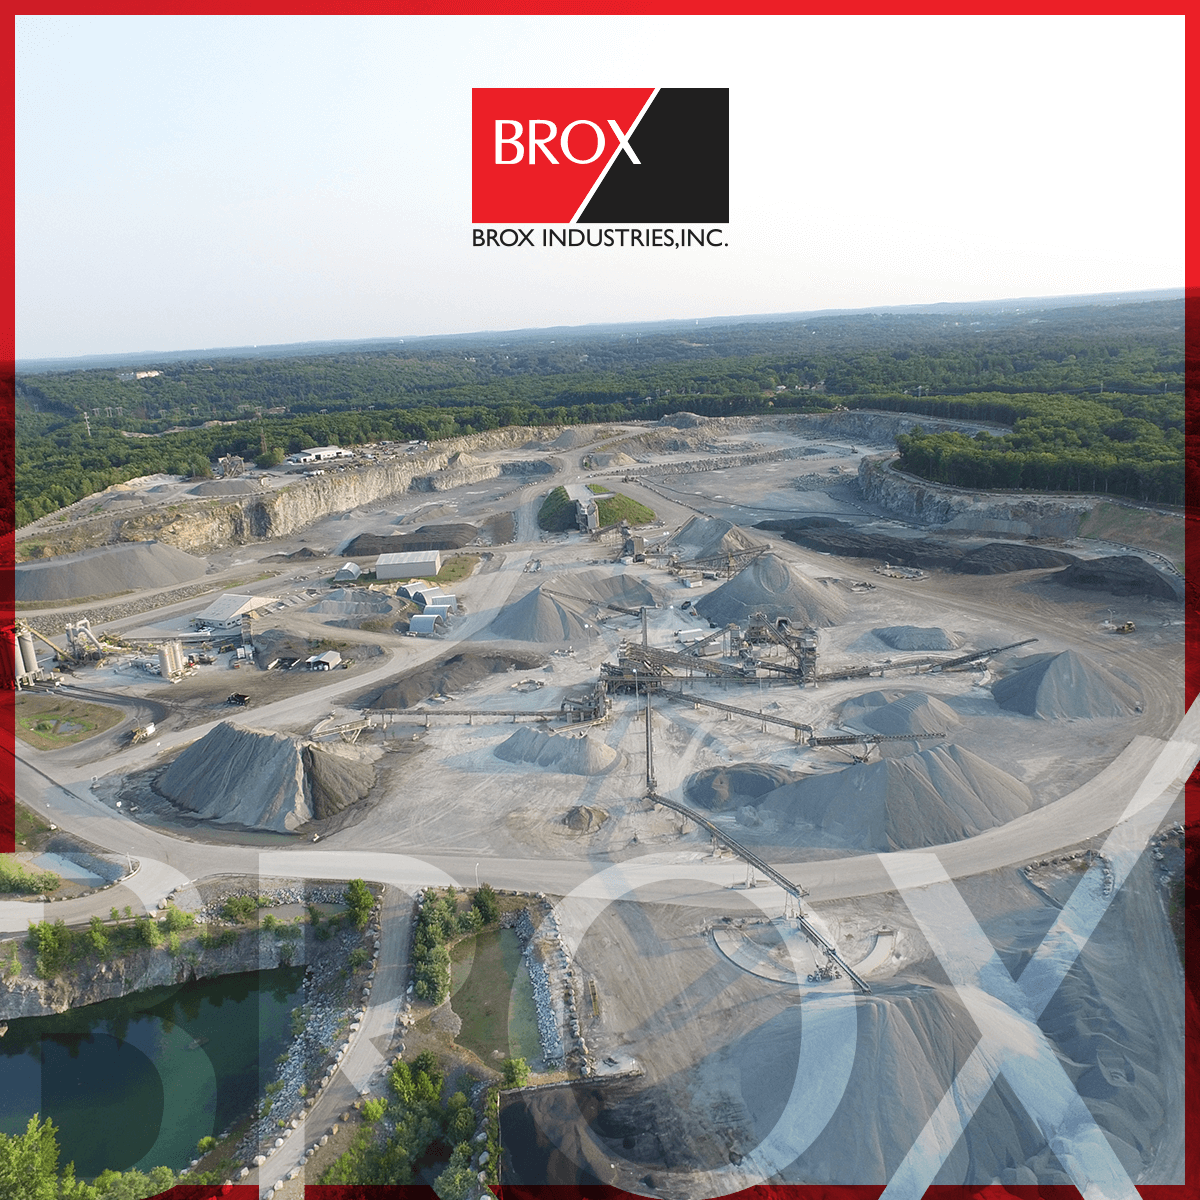 Our track record for supplying high-quality, locally sourced materials, which are constantly within specs, is unmatched. From sub-base materials to asphalt products, our quarries have been producing high-quality materials for the construction industry in Northeast for decades.